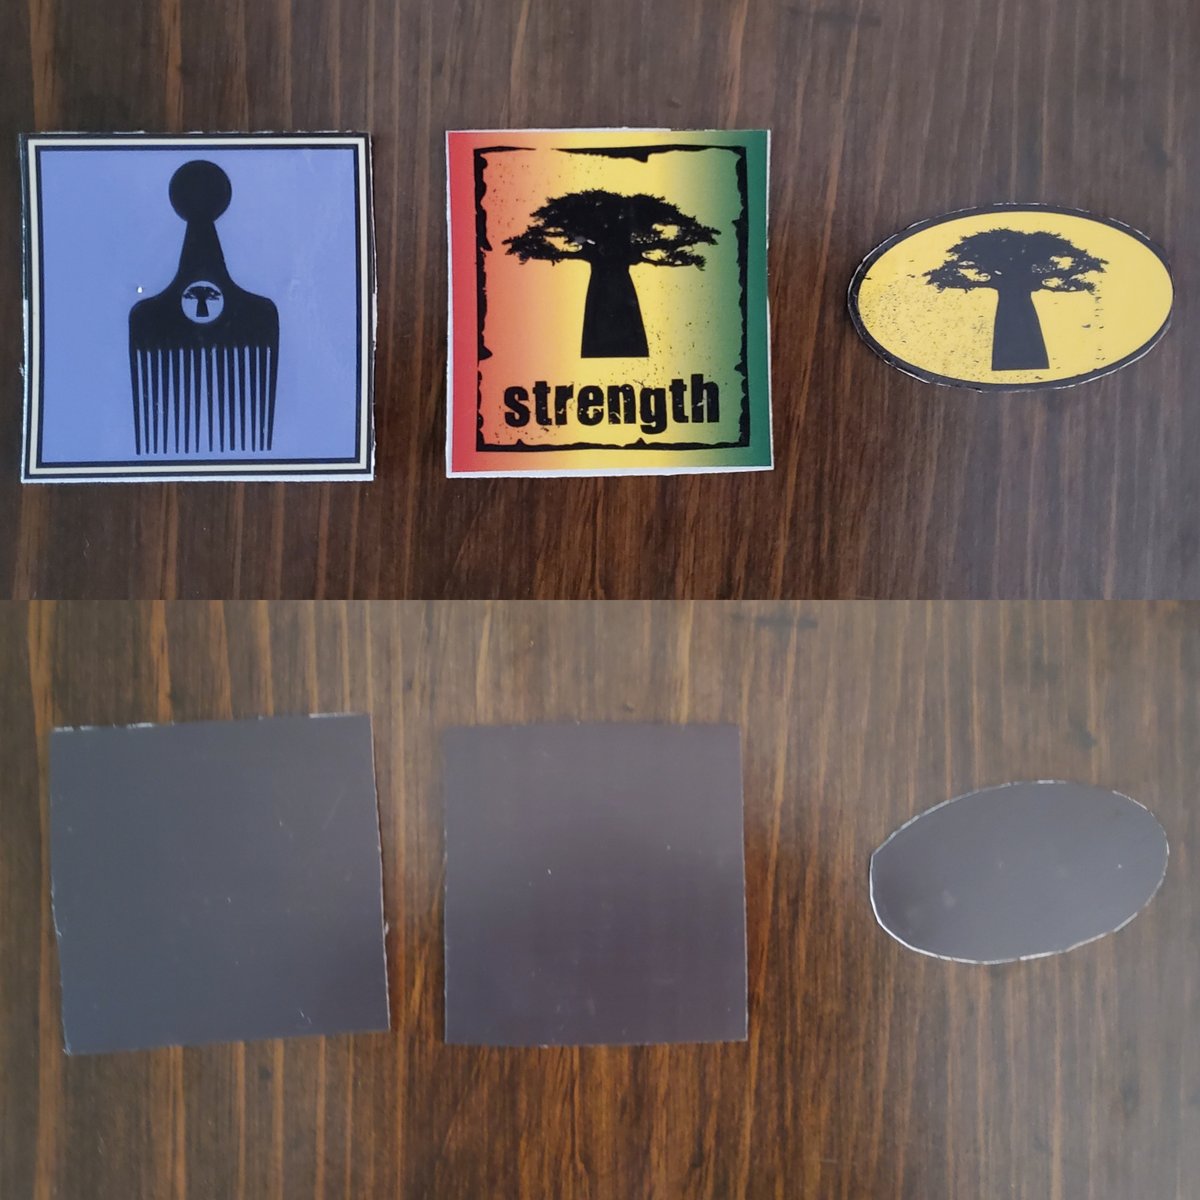 Image of Strength homemade magnets